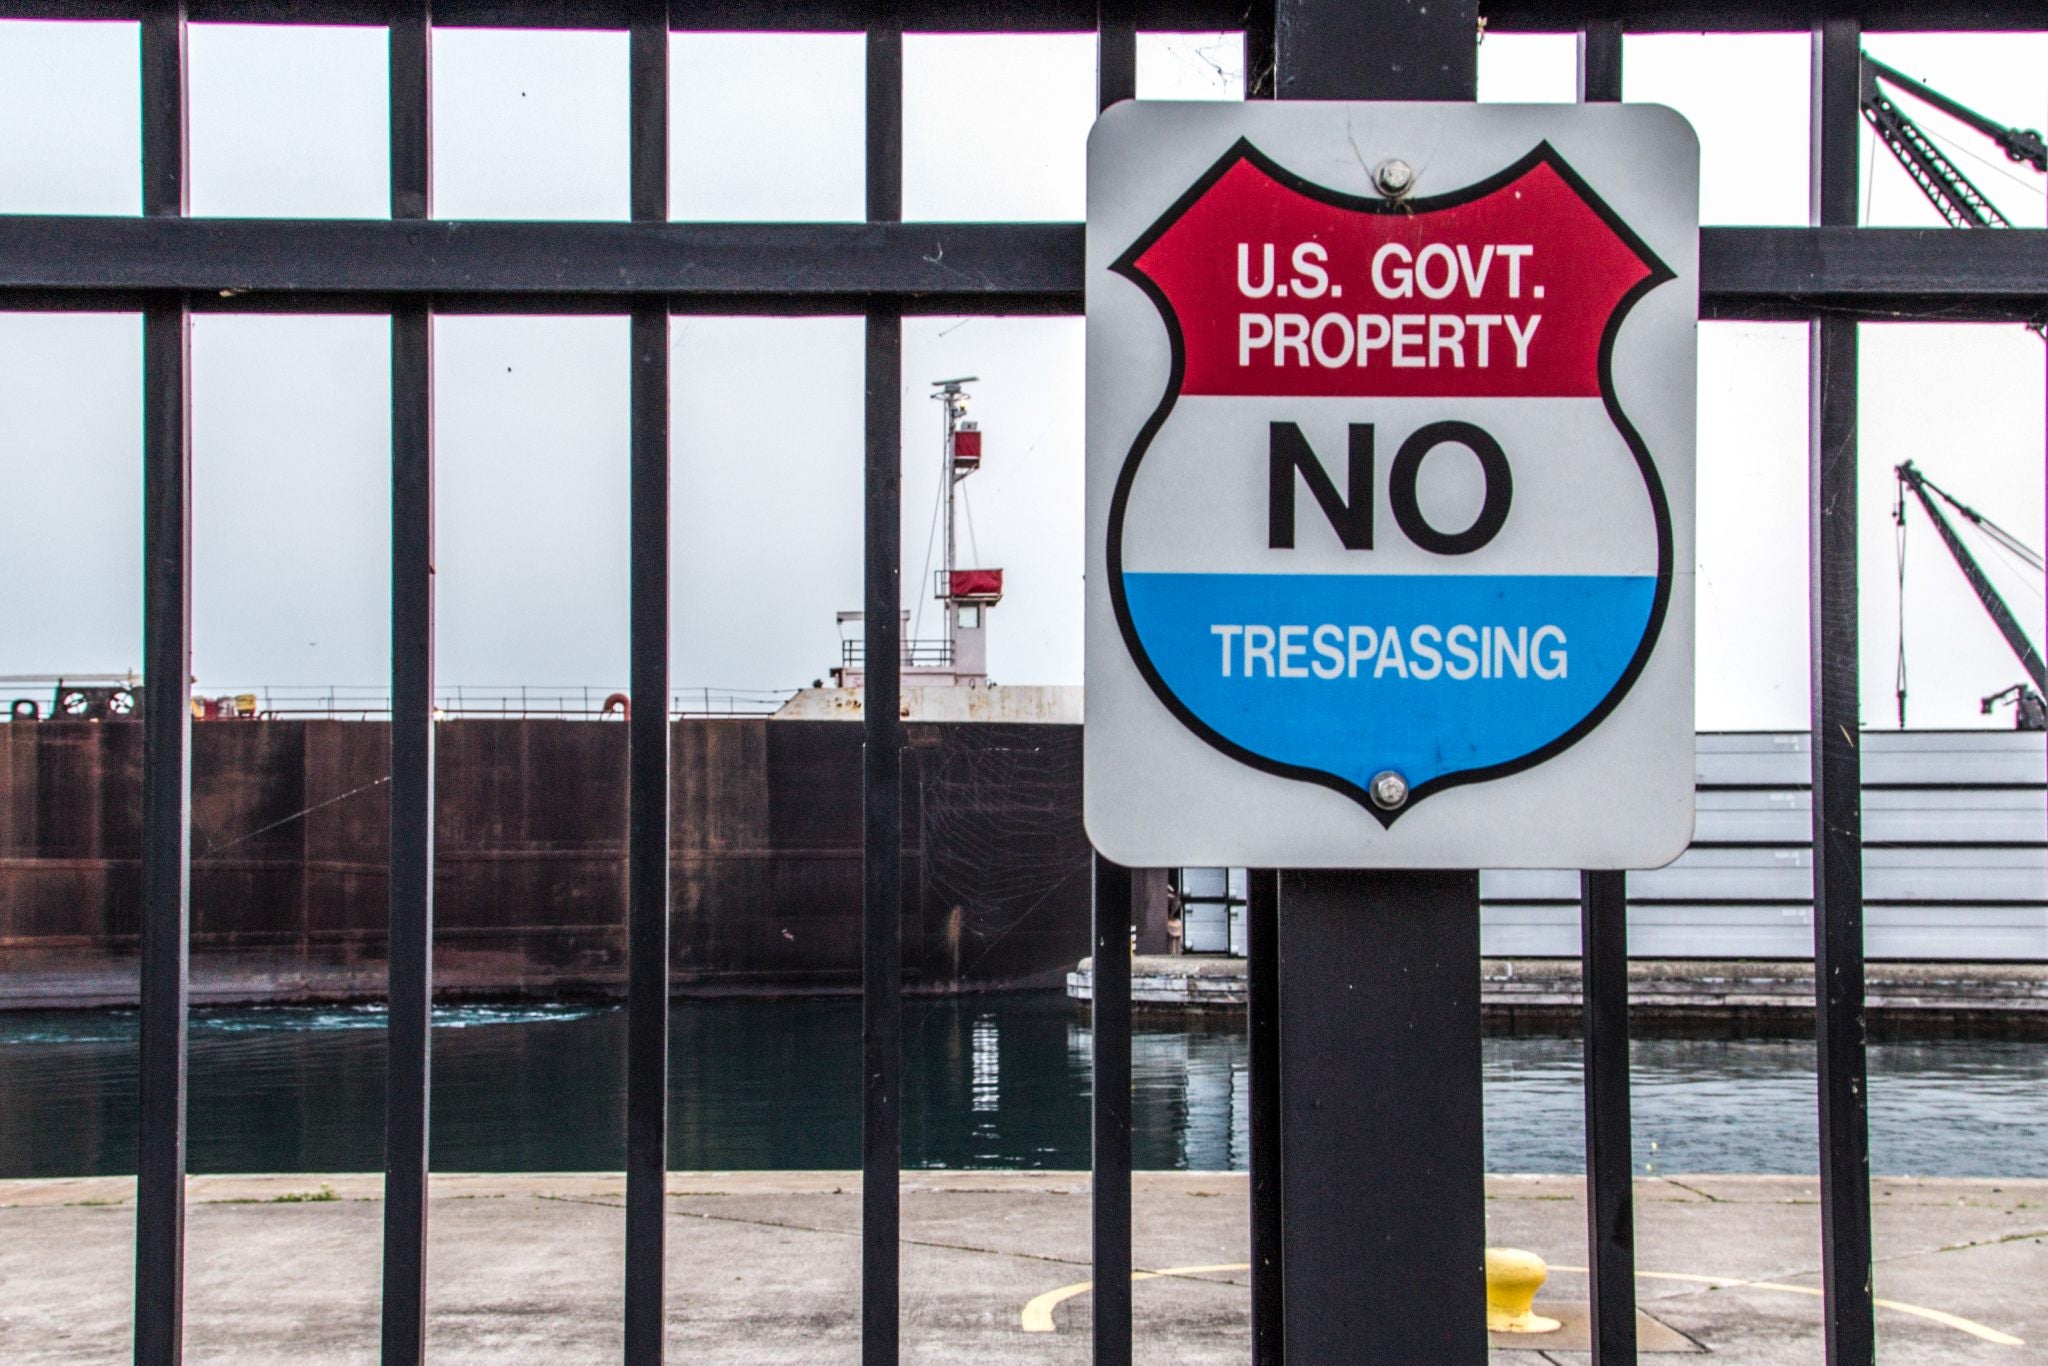 exterior photo of an electronic heavy-duty gate with a U.S. government no trespassing sign on it in front of ships